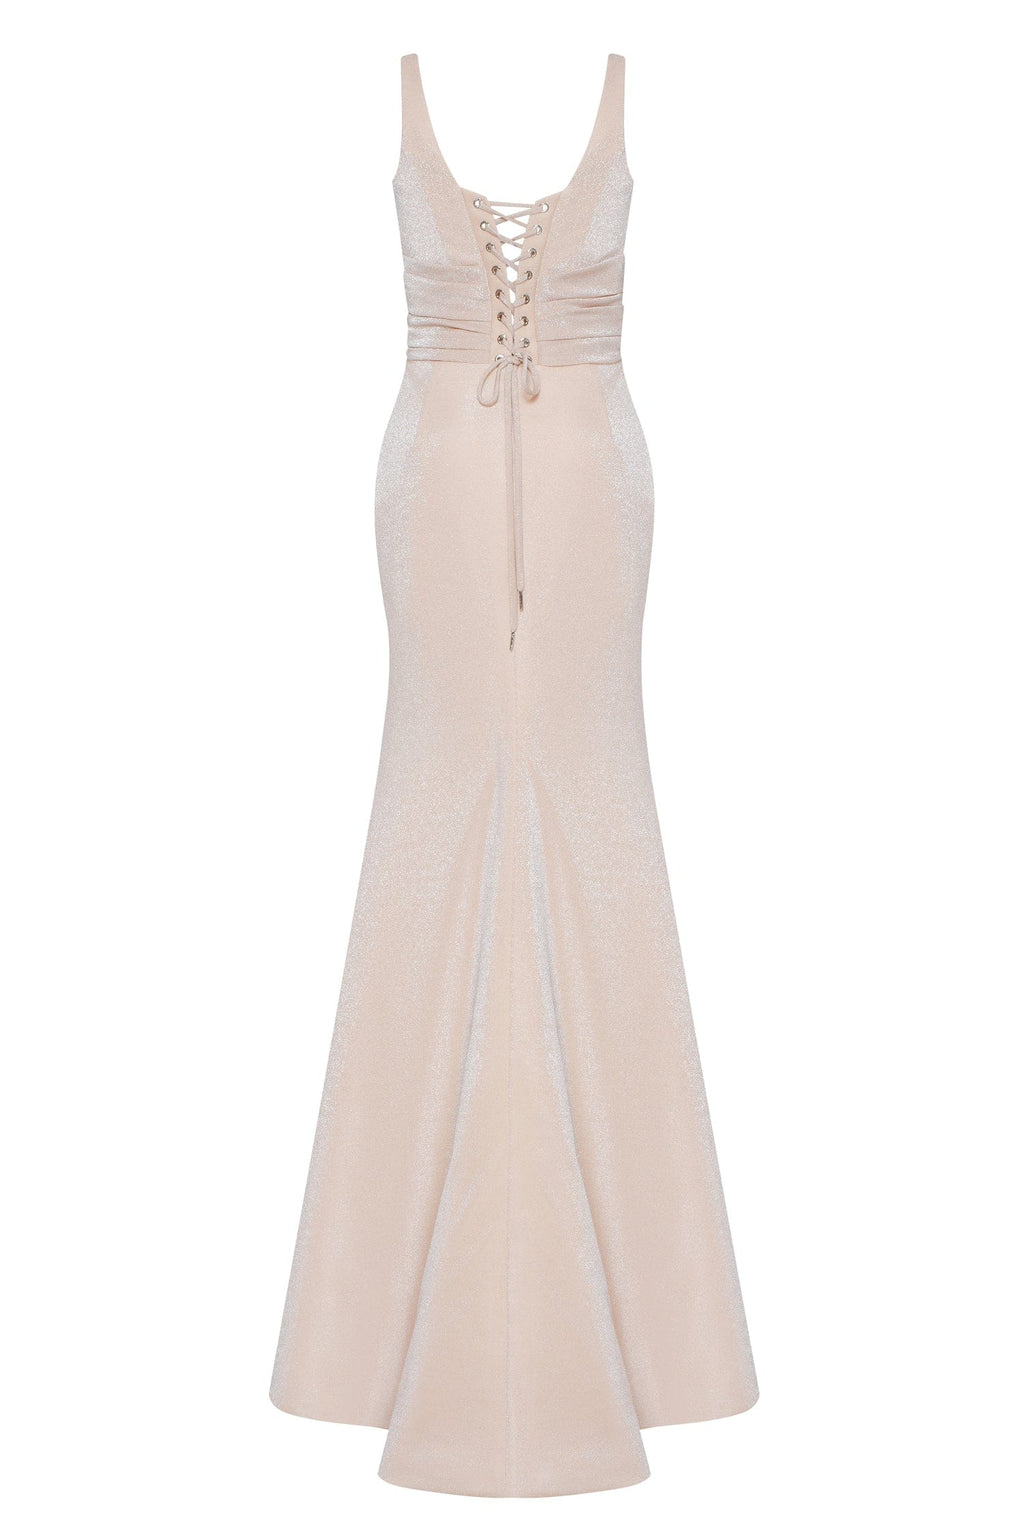 Shiny evening maxi dress on straps with a daring high slit - Milla